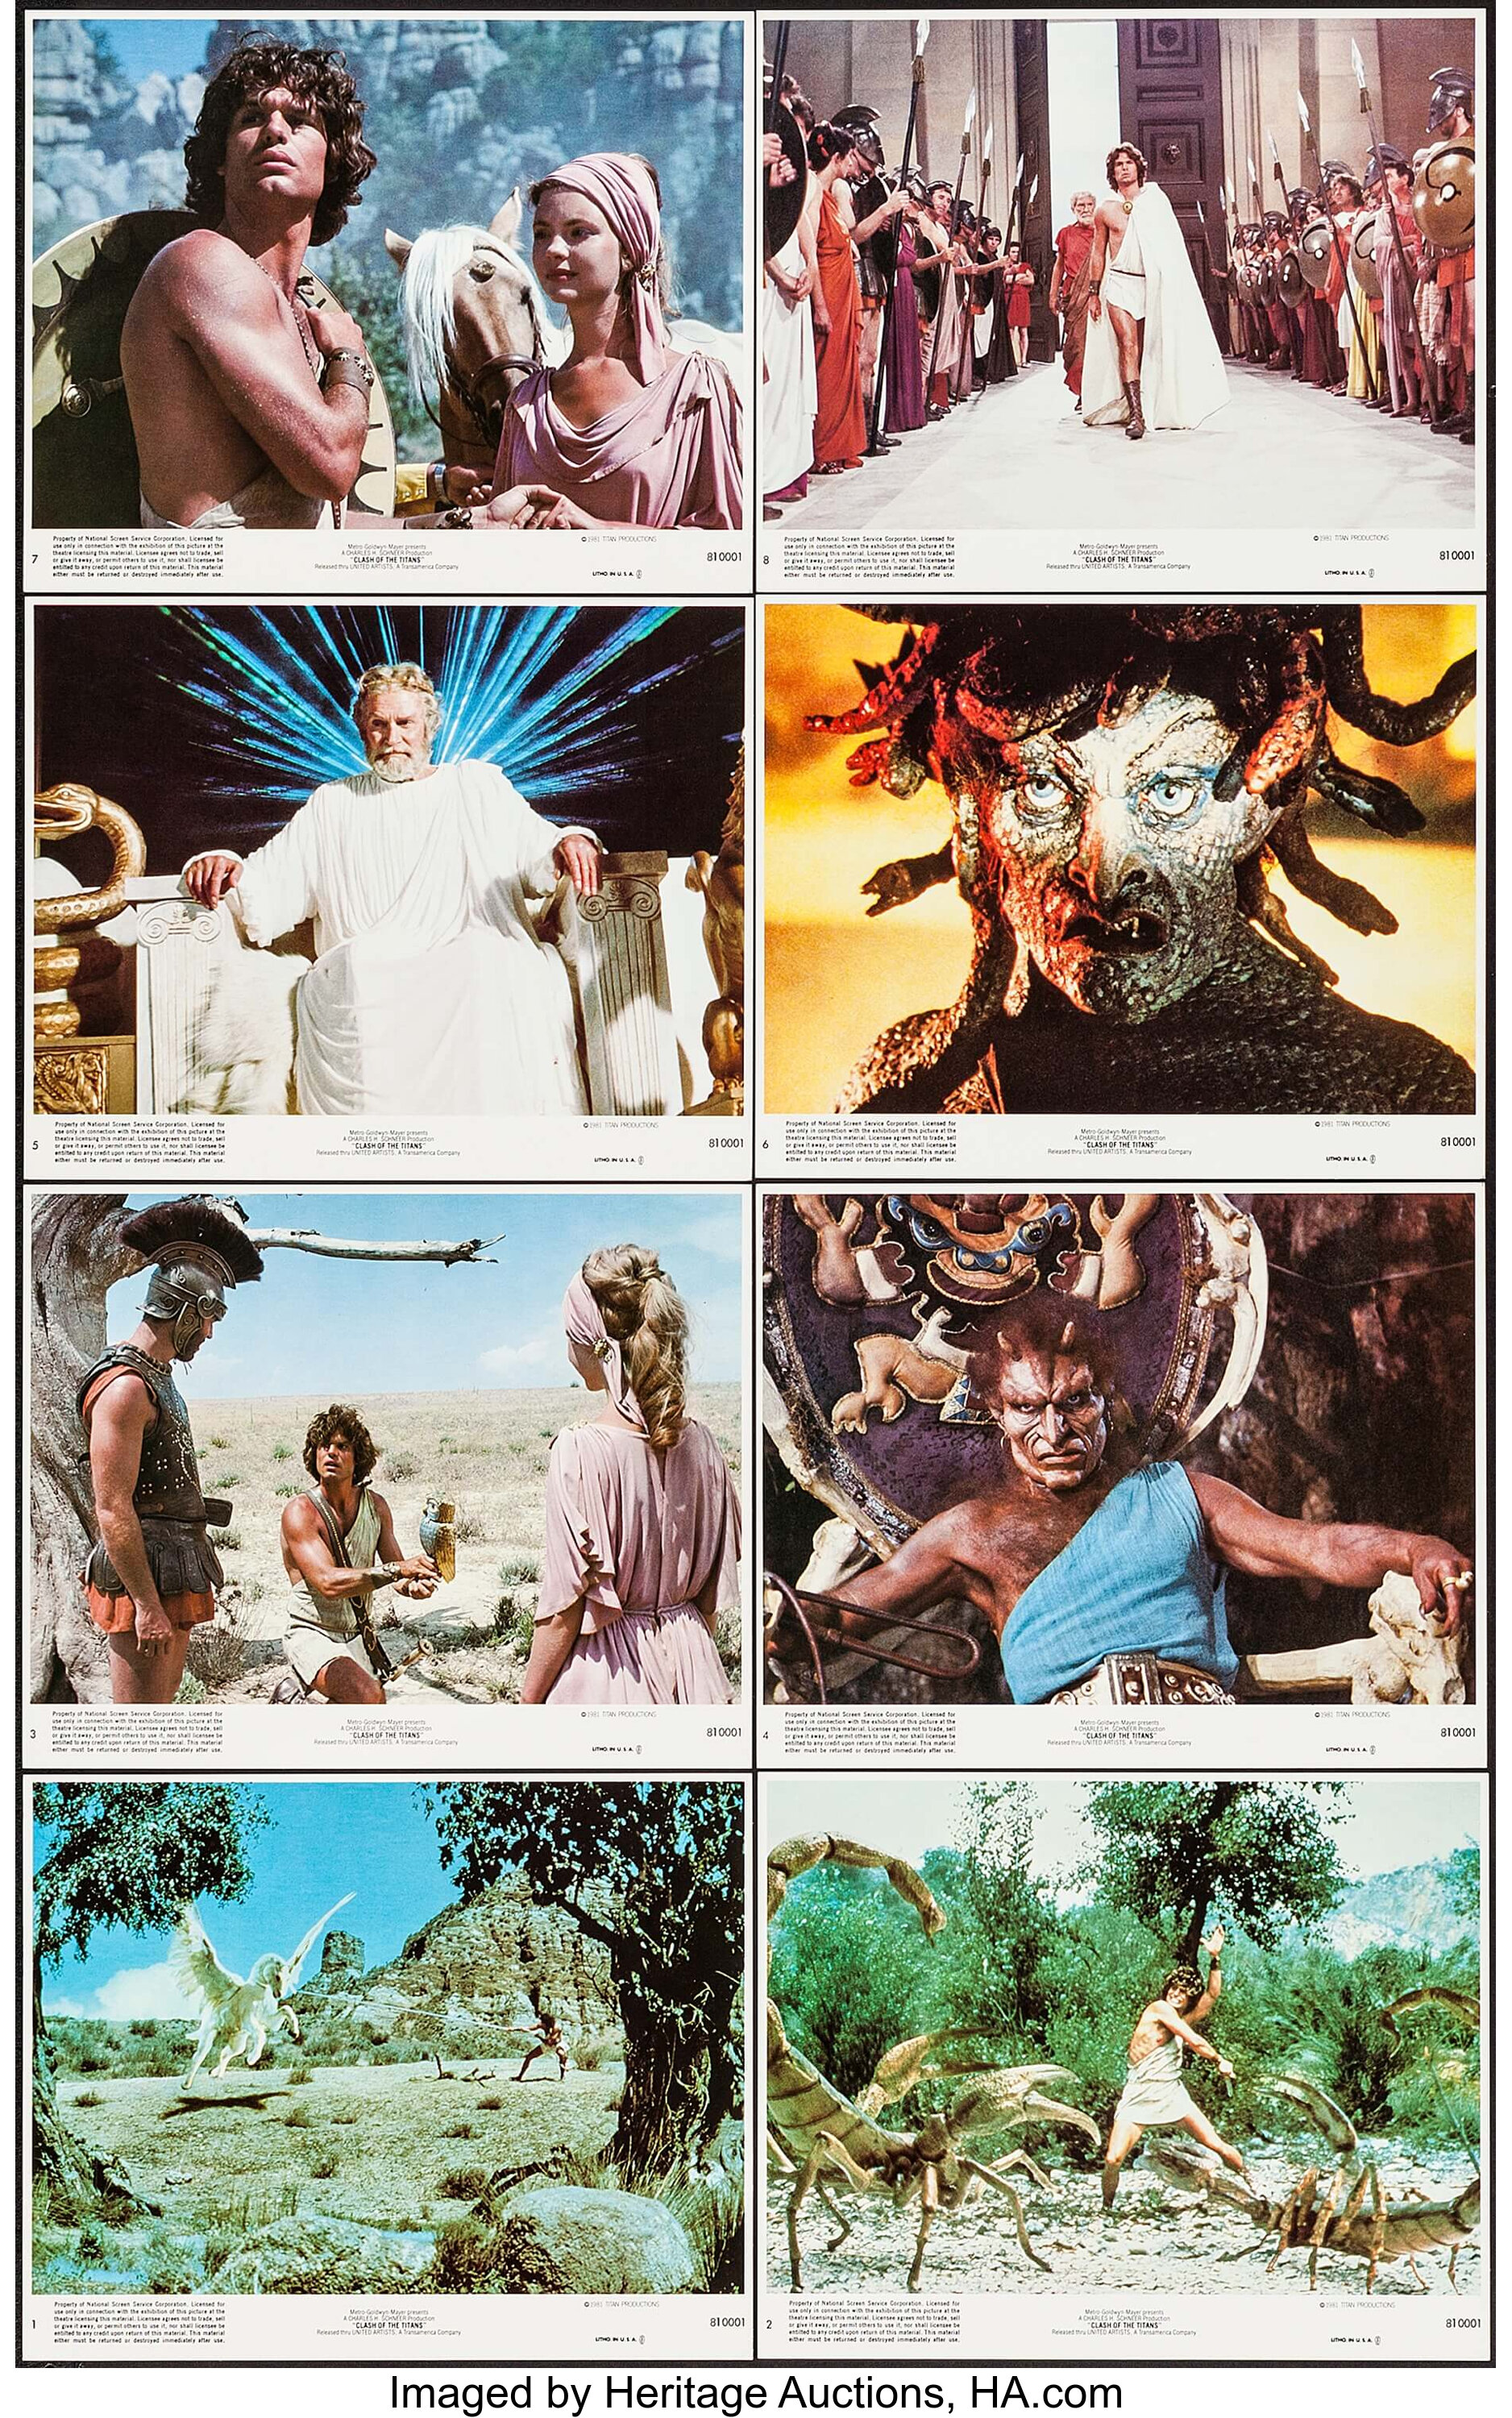 Clash of the Titans Movie Poster 1981 1 Sheet (27x41)